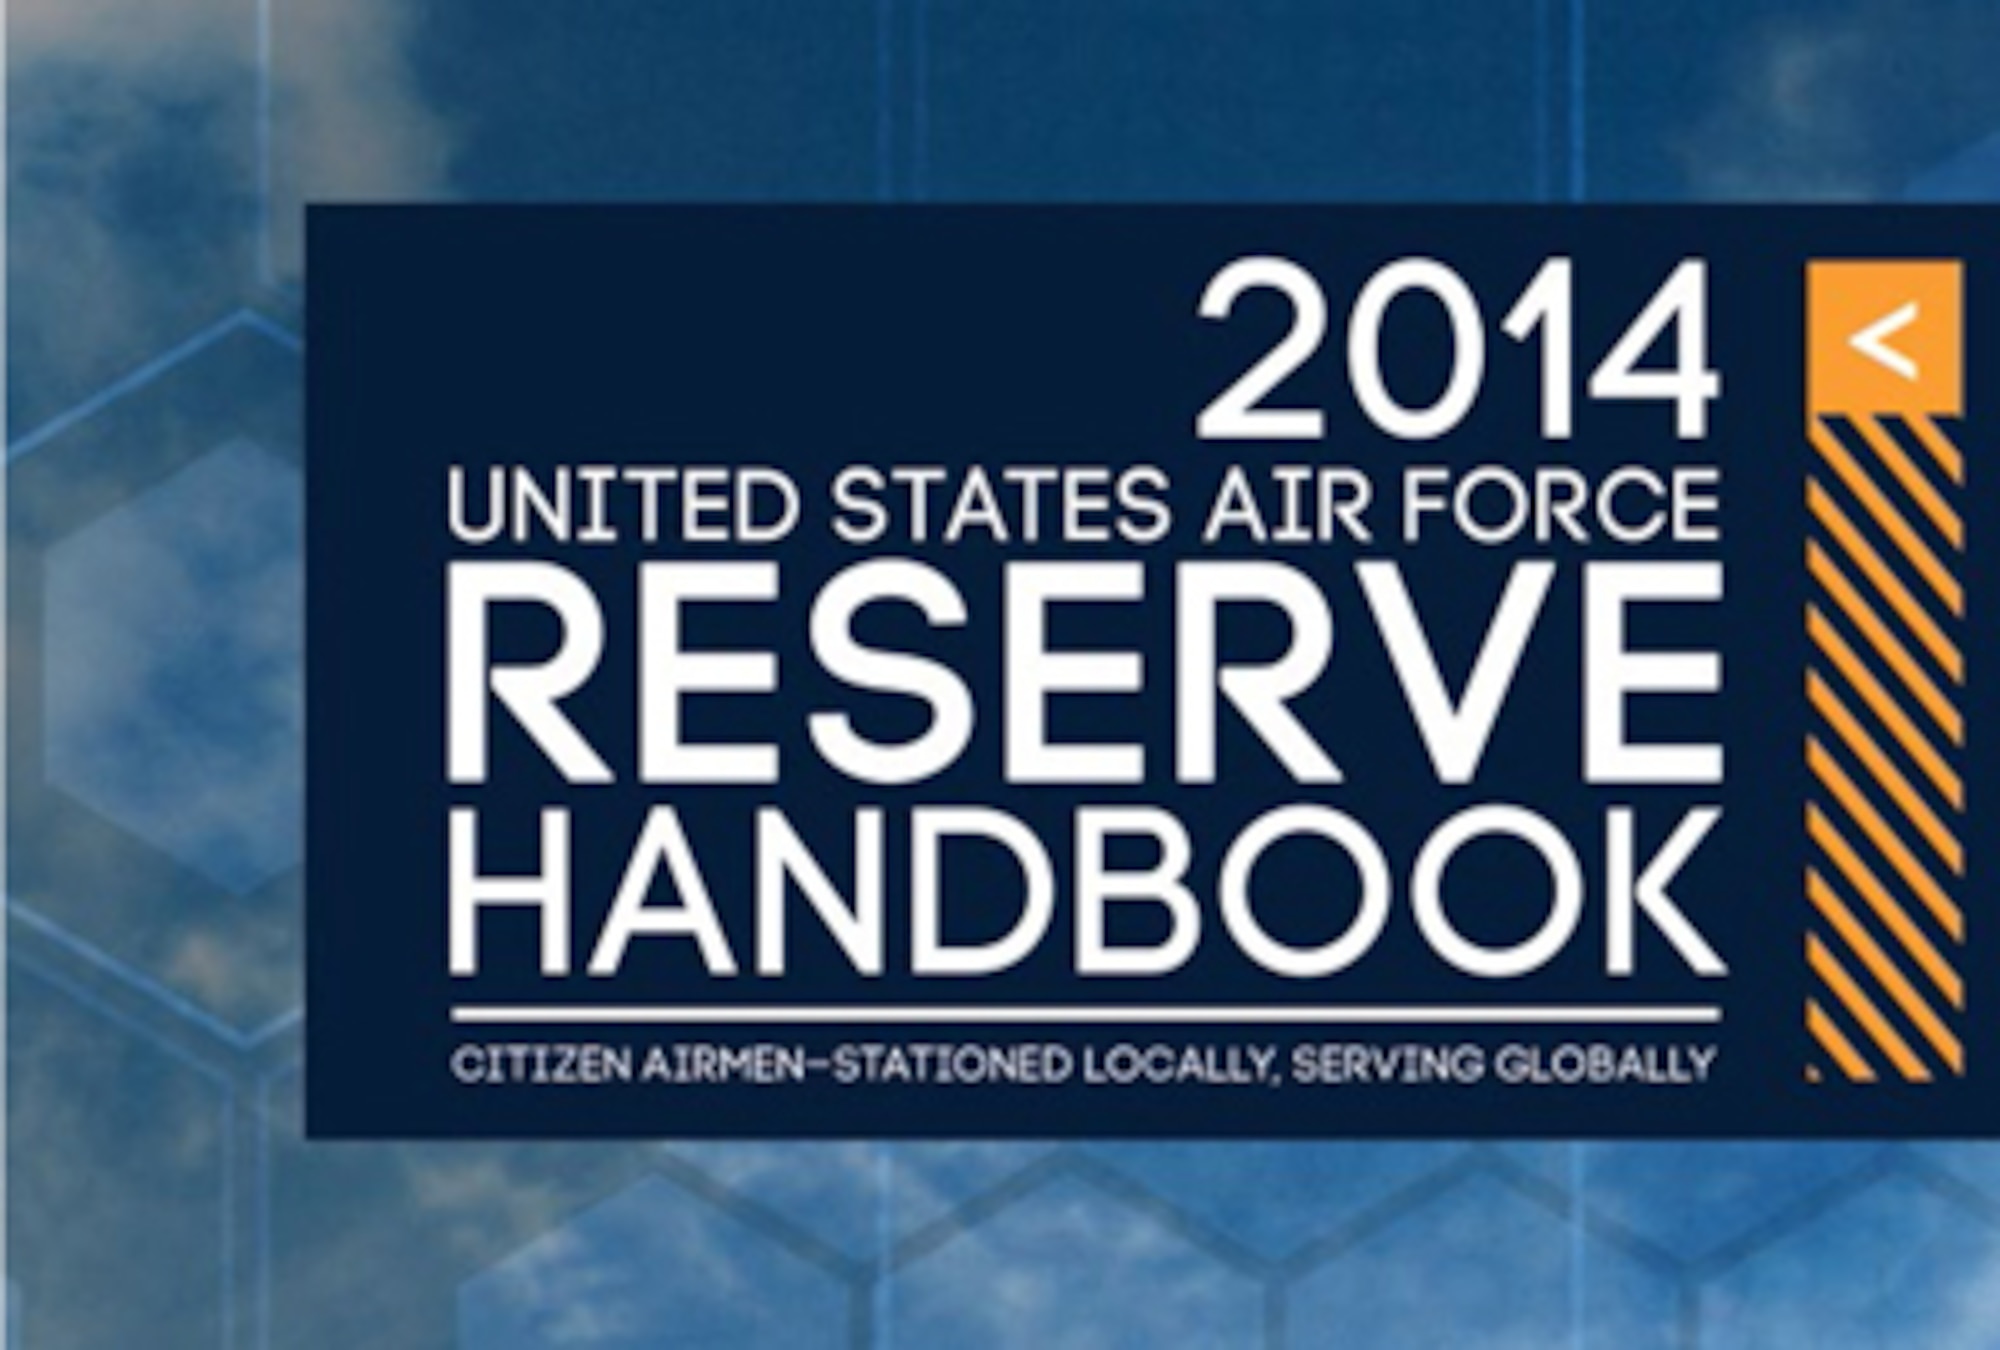 The digital edition of 2014 United States Air Force Reserve Handbook is now available on the Air Force Reserve Command public website and from the Defense Video and Imagery Distribution System.   